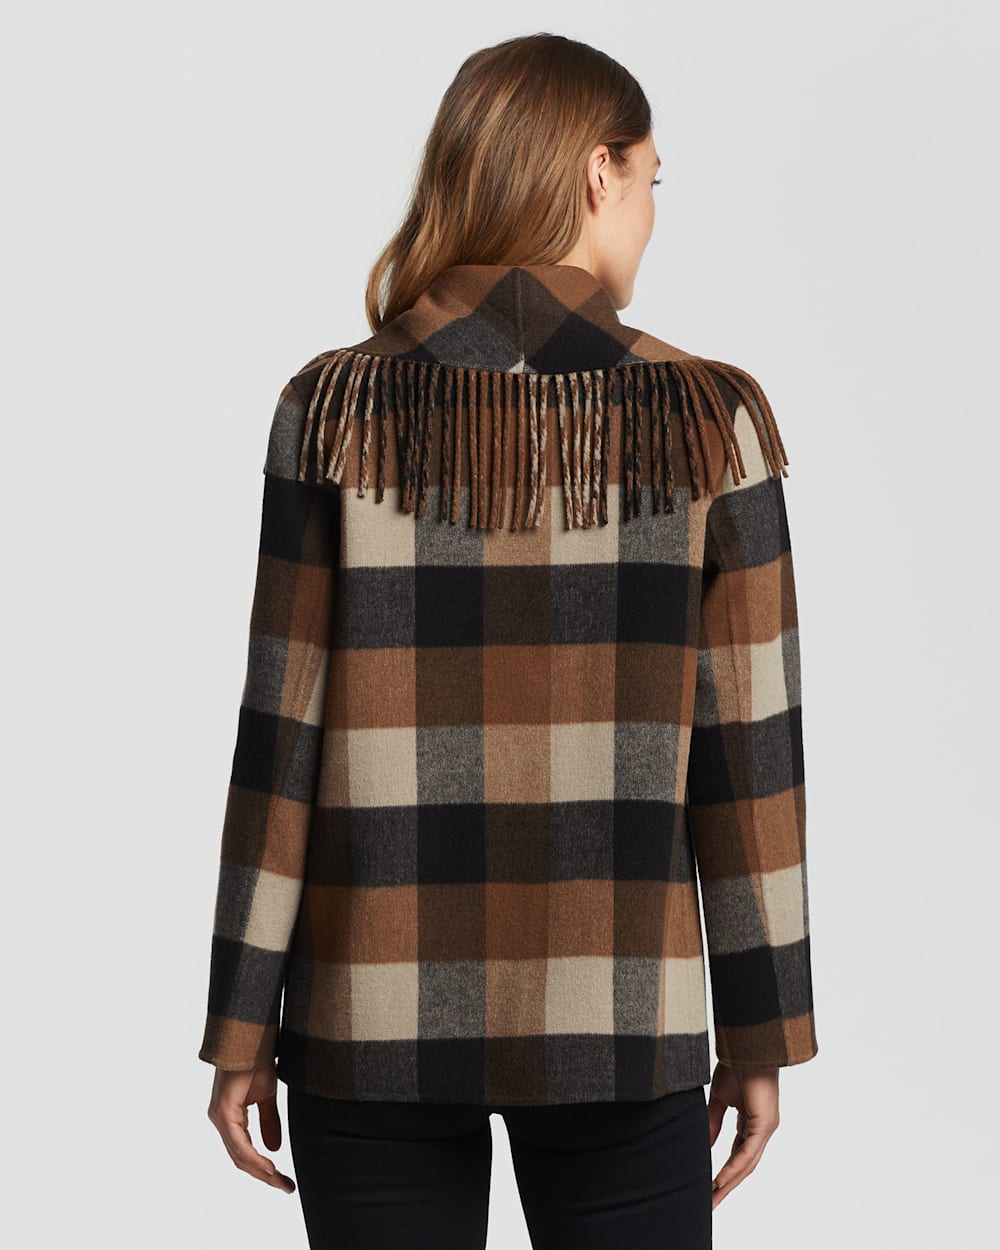 ALTERNATE VIEW OF WOMEN'S CHEYENNE FRINGED SHAWL-COLLAR COAT IN CAMEL/CHARCOAL PLAID image number 2